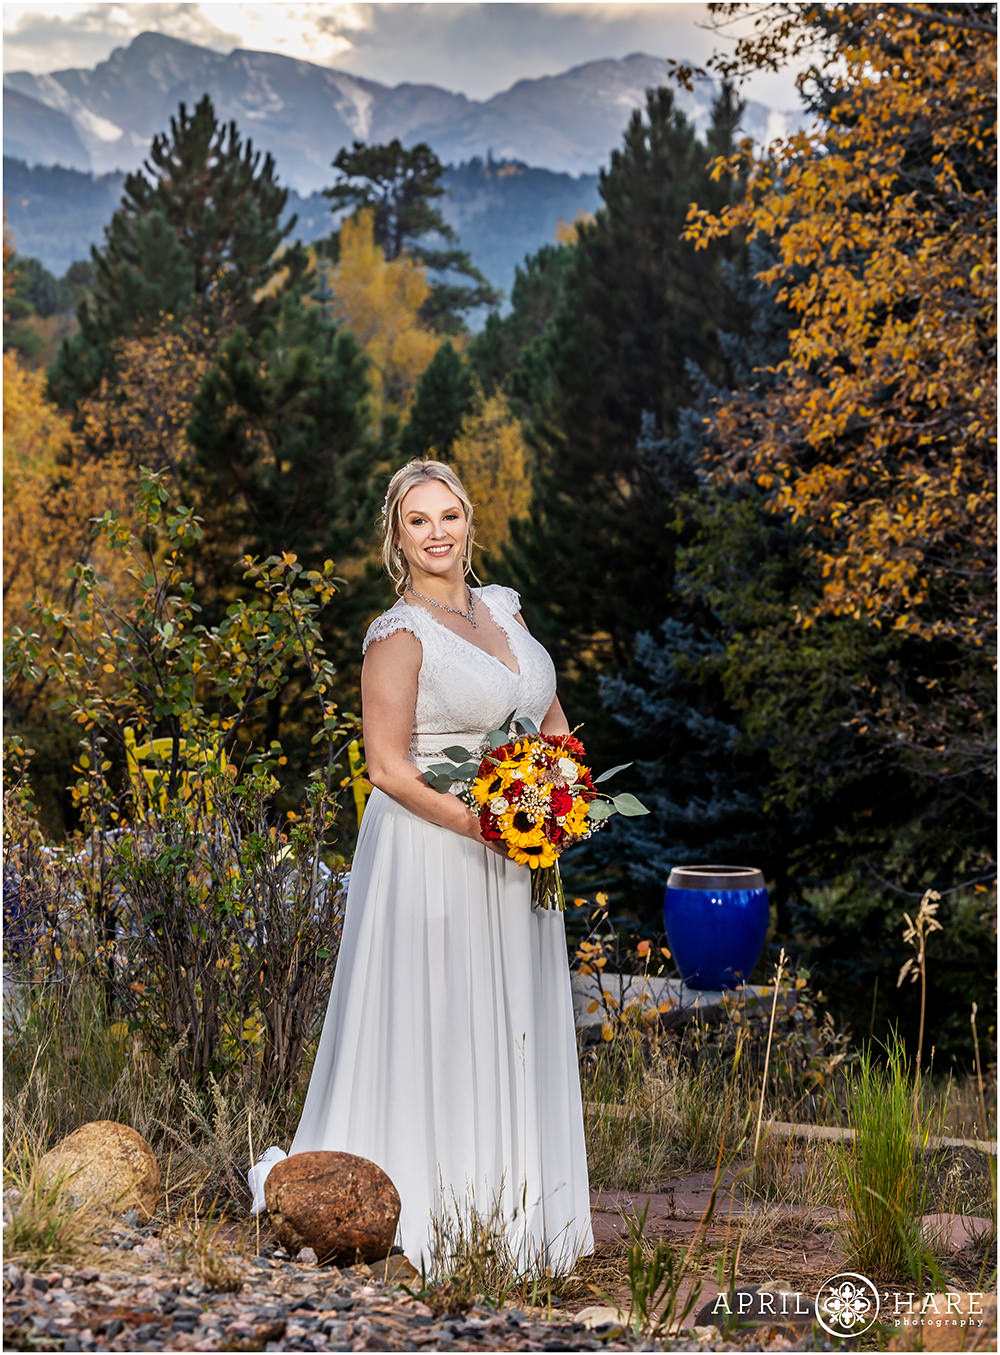 Bridal Portrait with pretty mountain backdrop at Romantic Riversong Inn